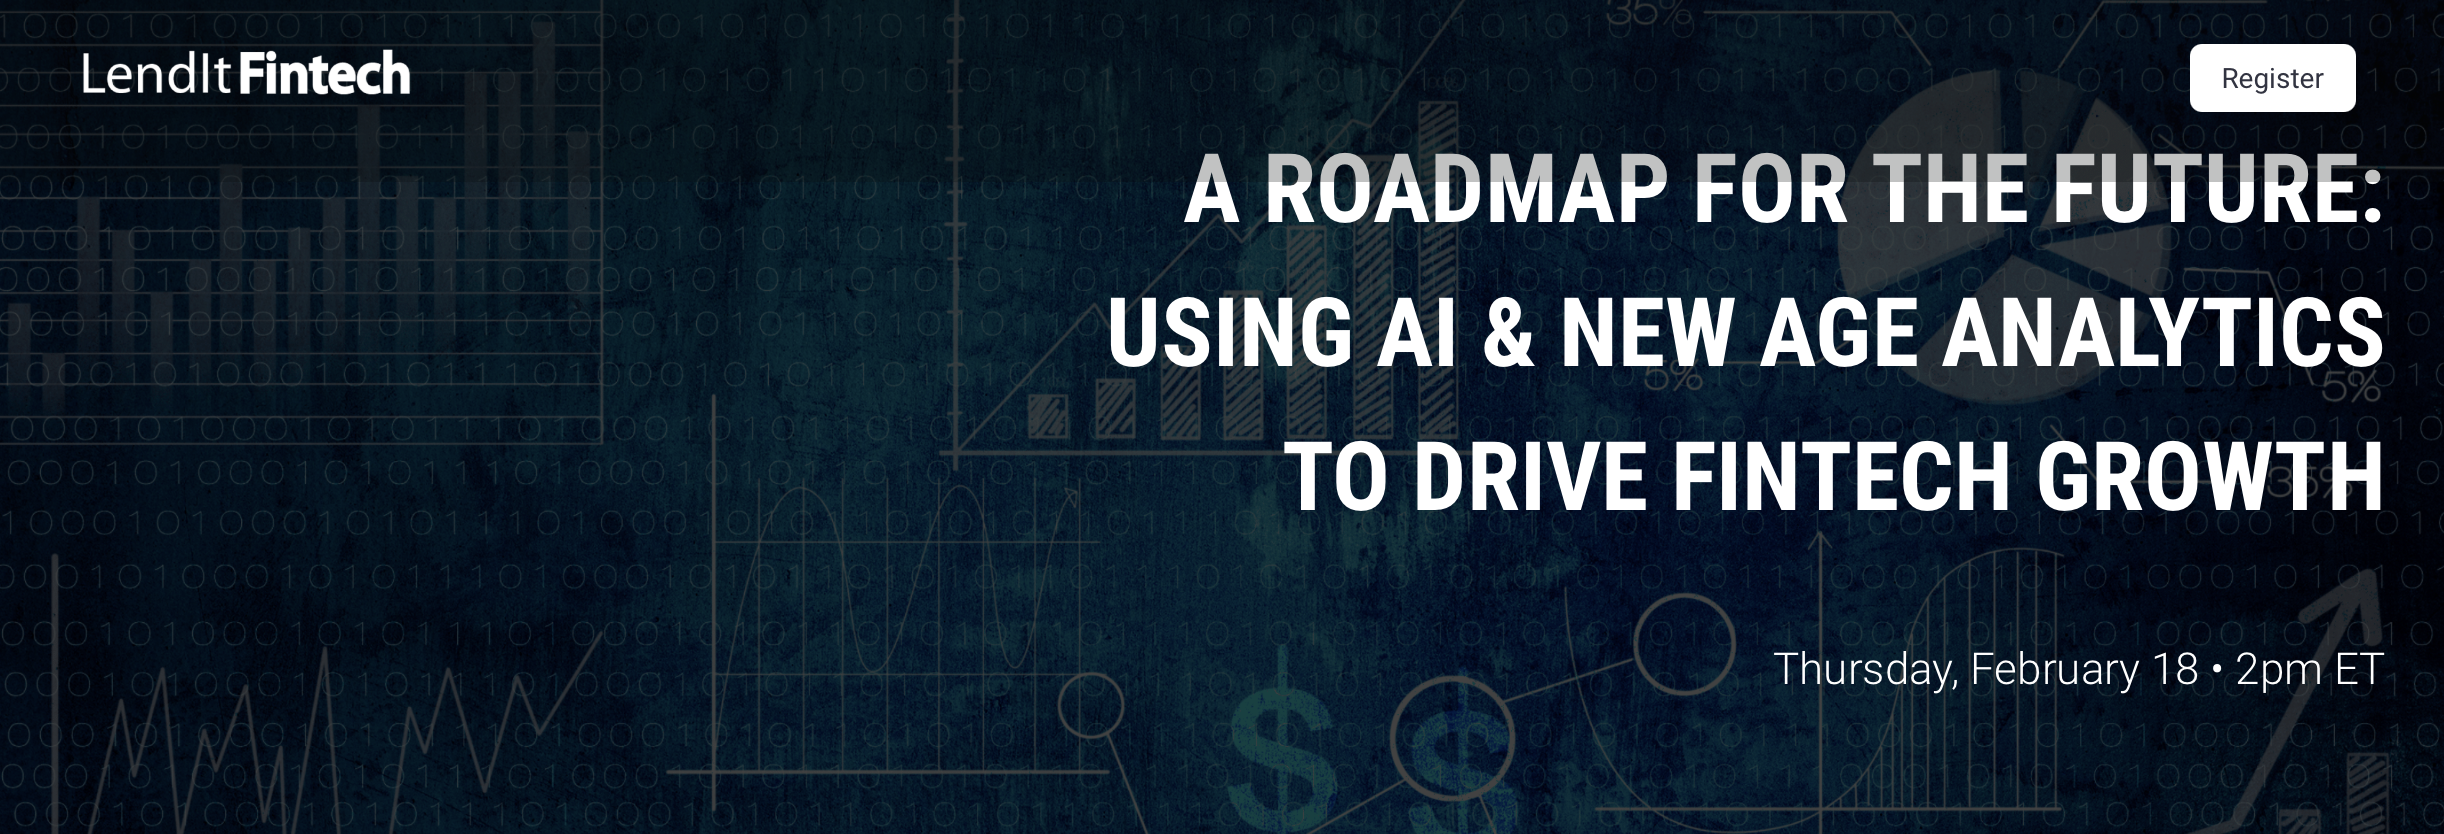 A Roadmap for the Future: Using AI & New Age Analytics to Drive Fintech Growth